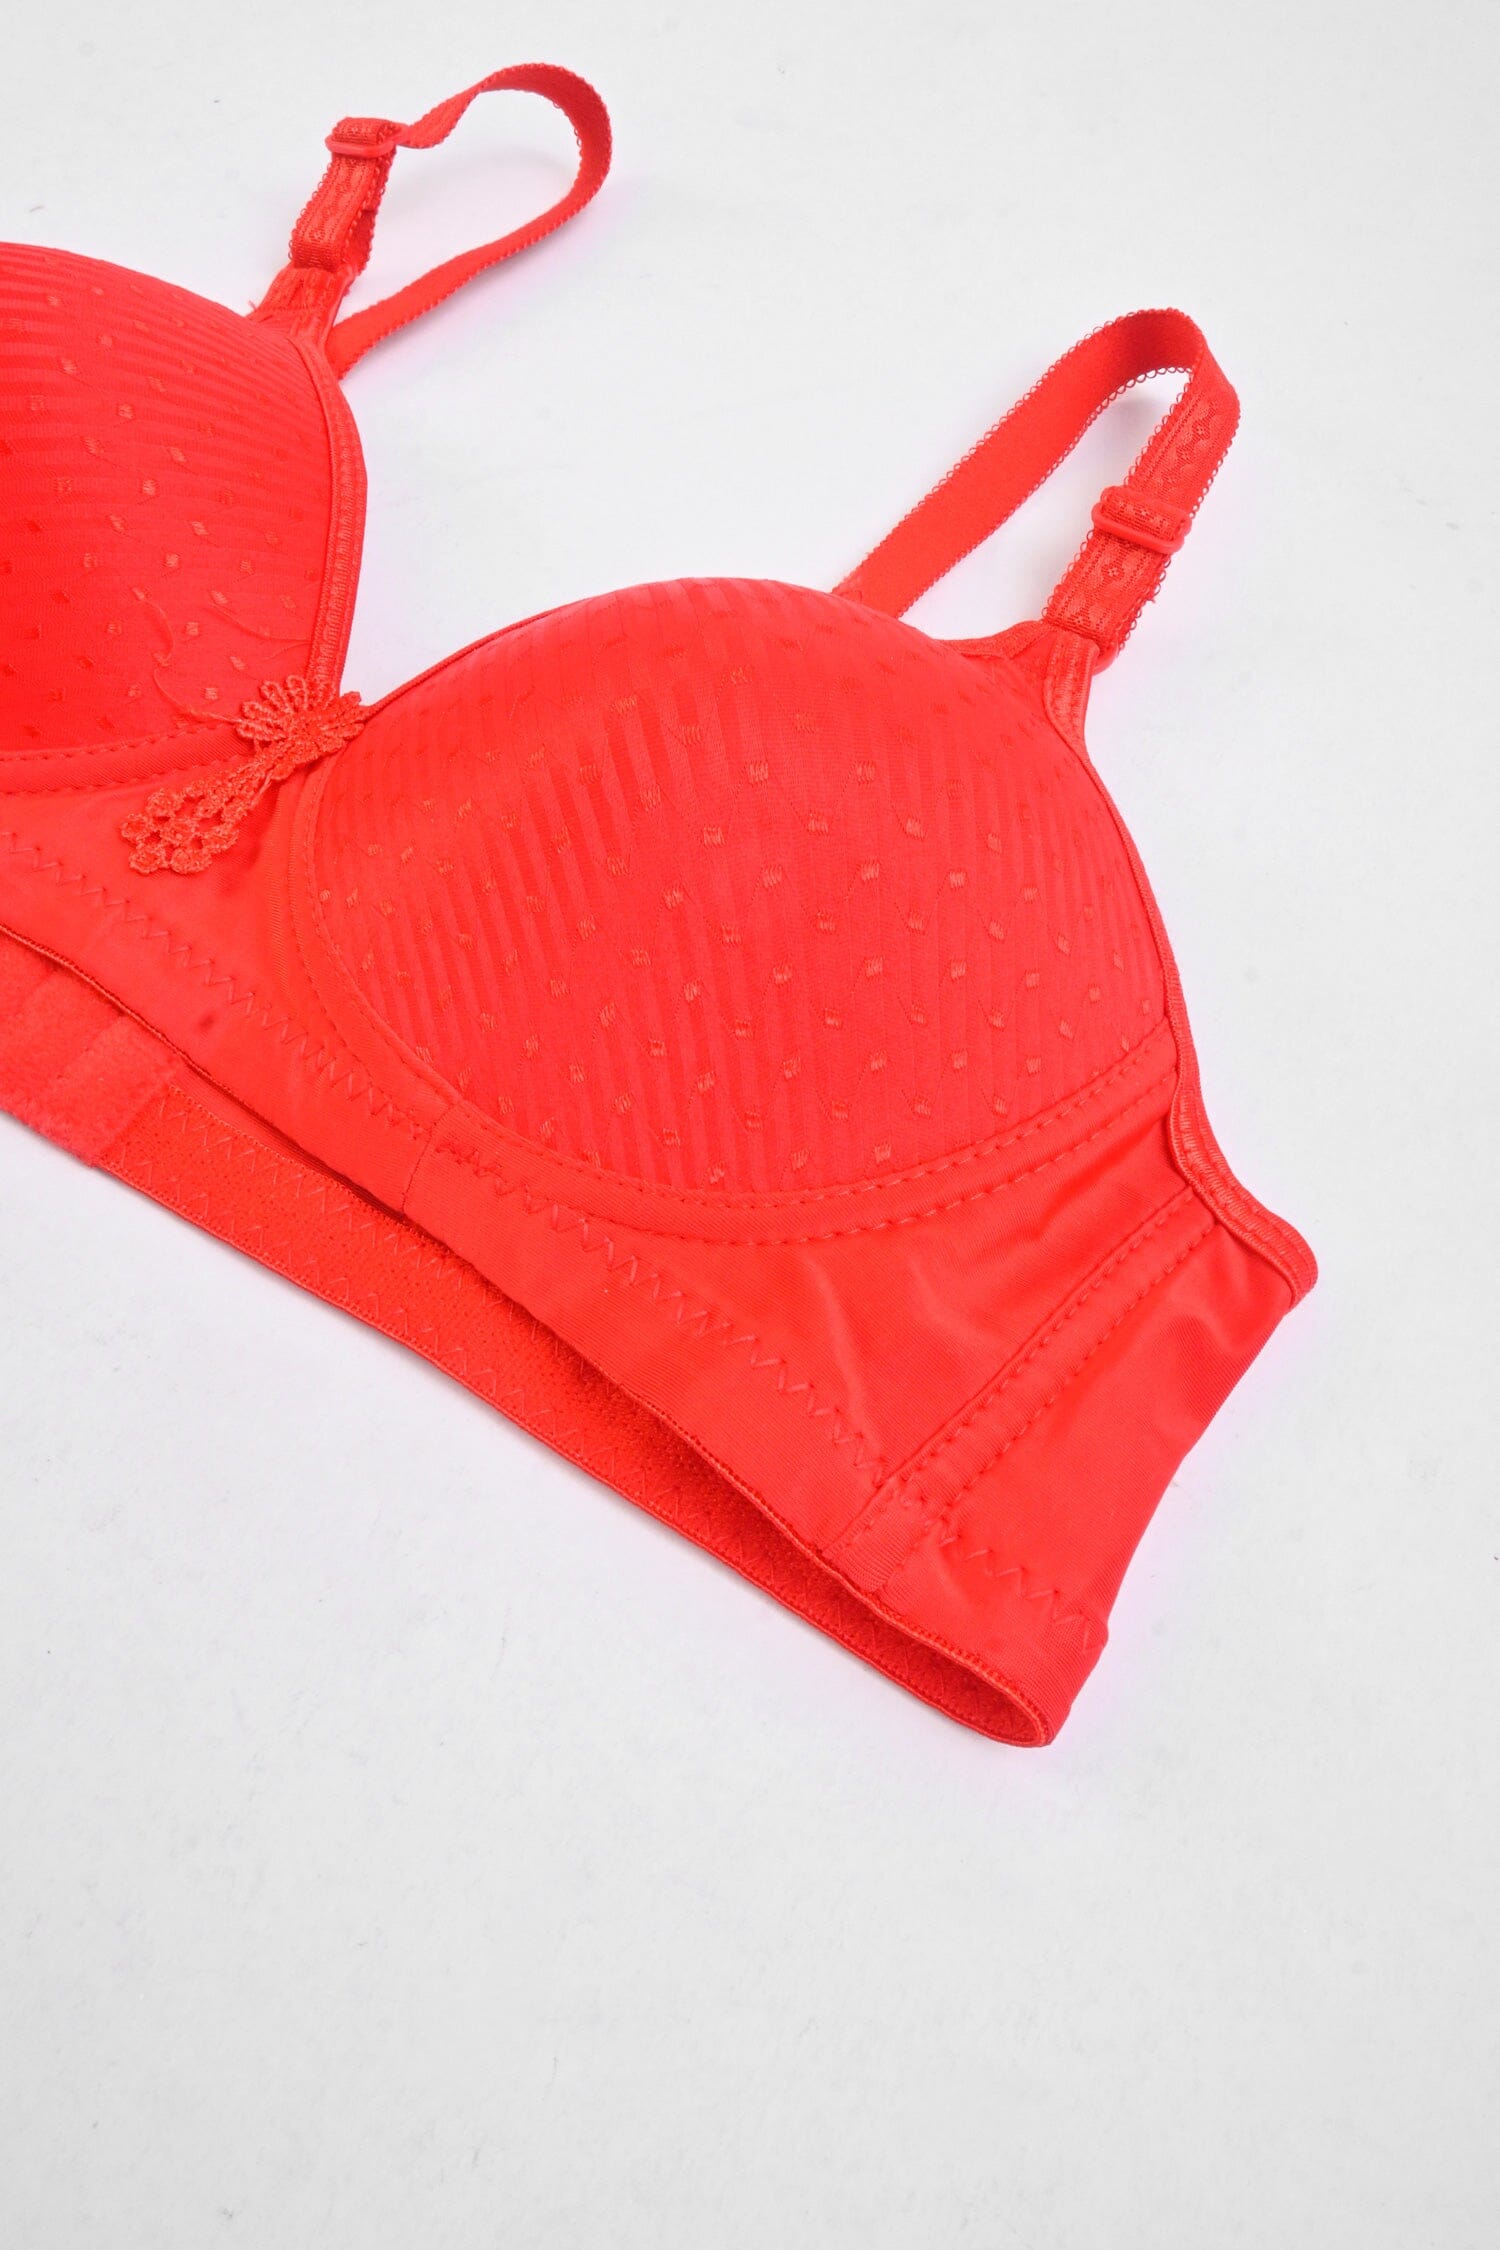 Women's Stretchable Padded Bra Women's Lingerie CPUS 